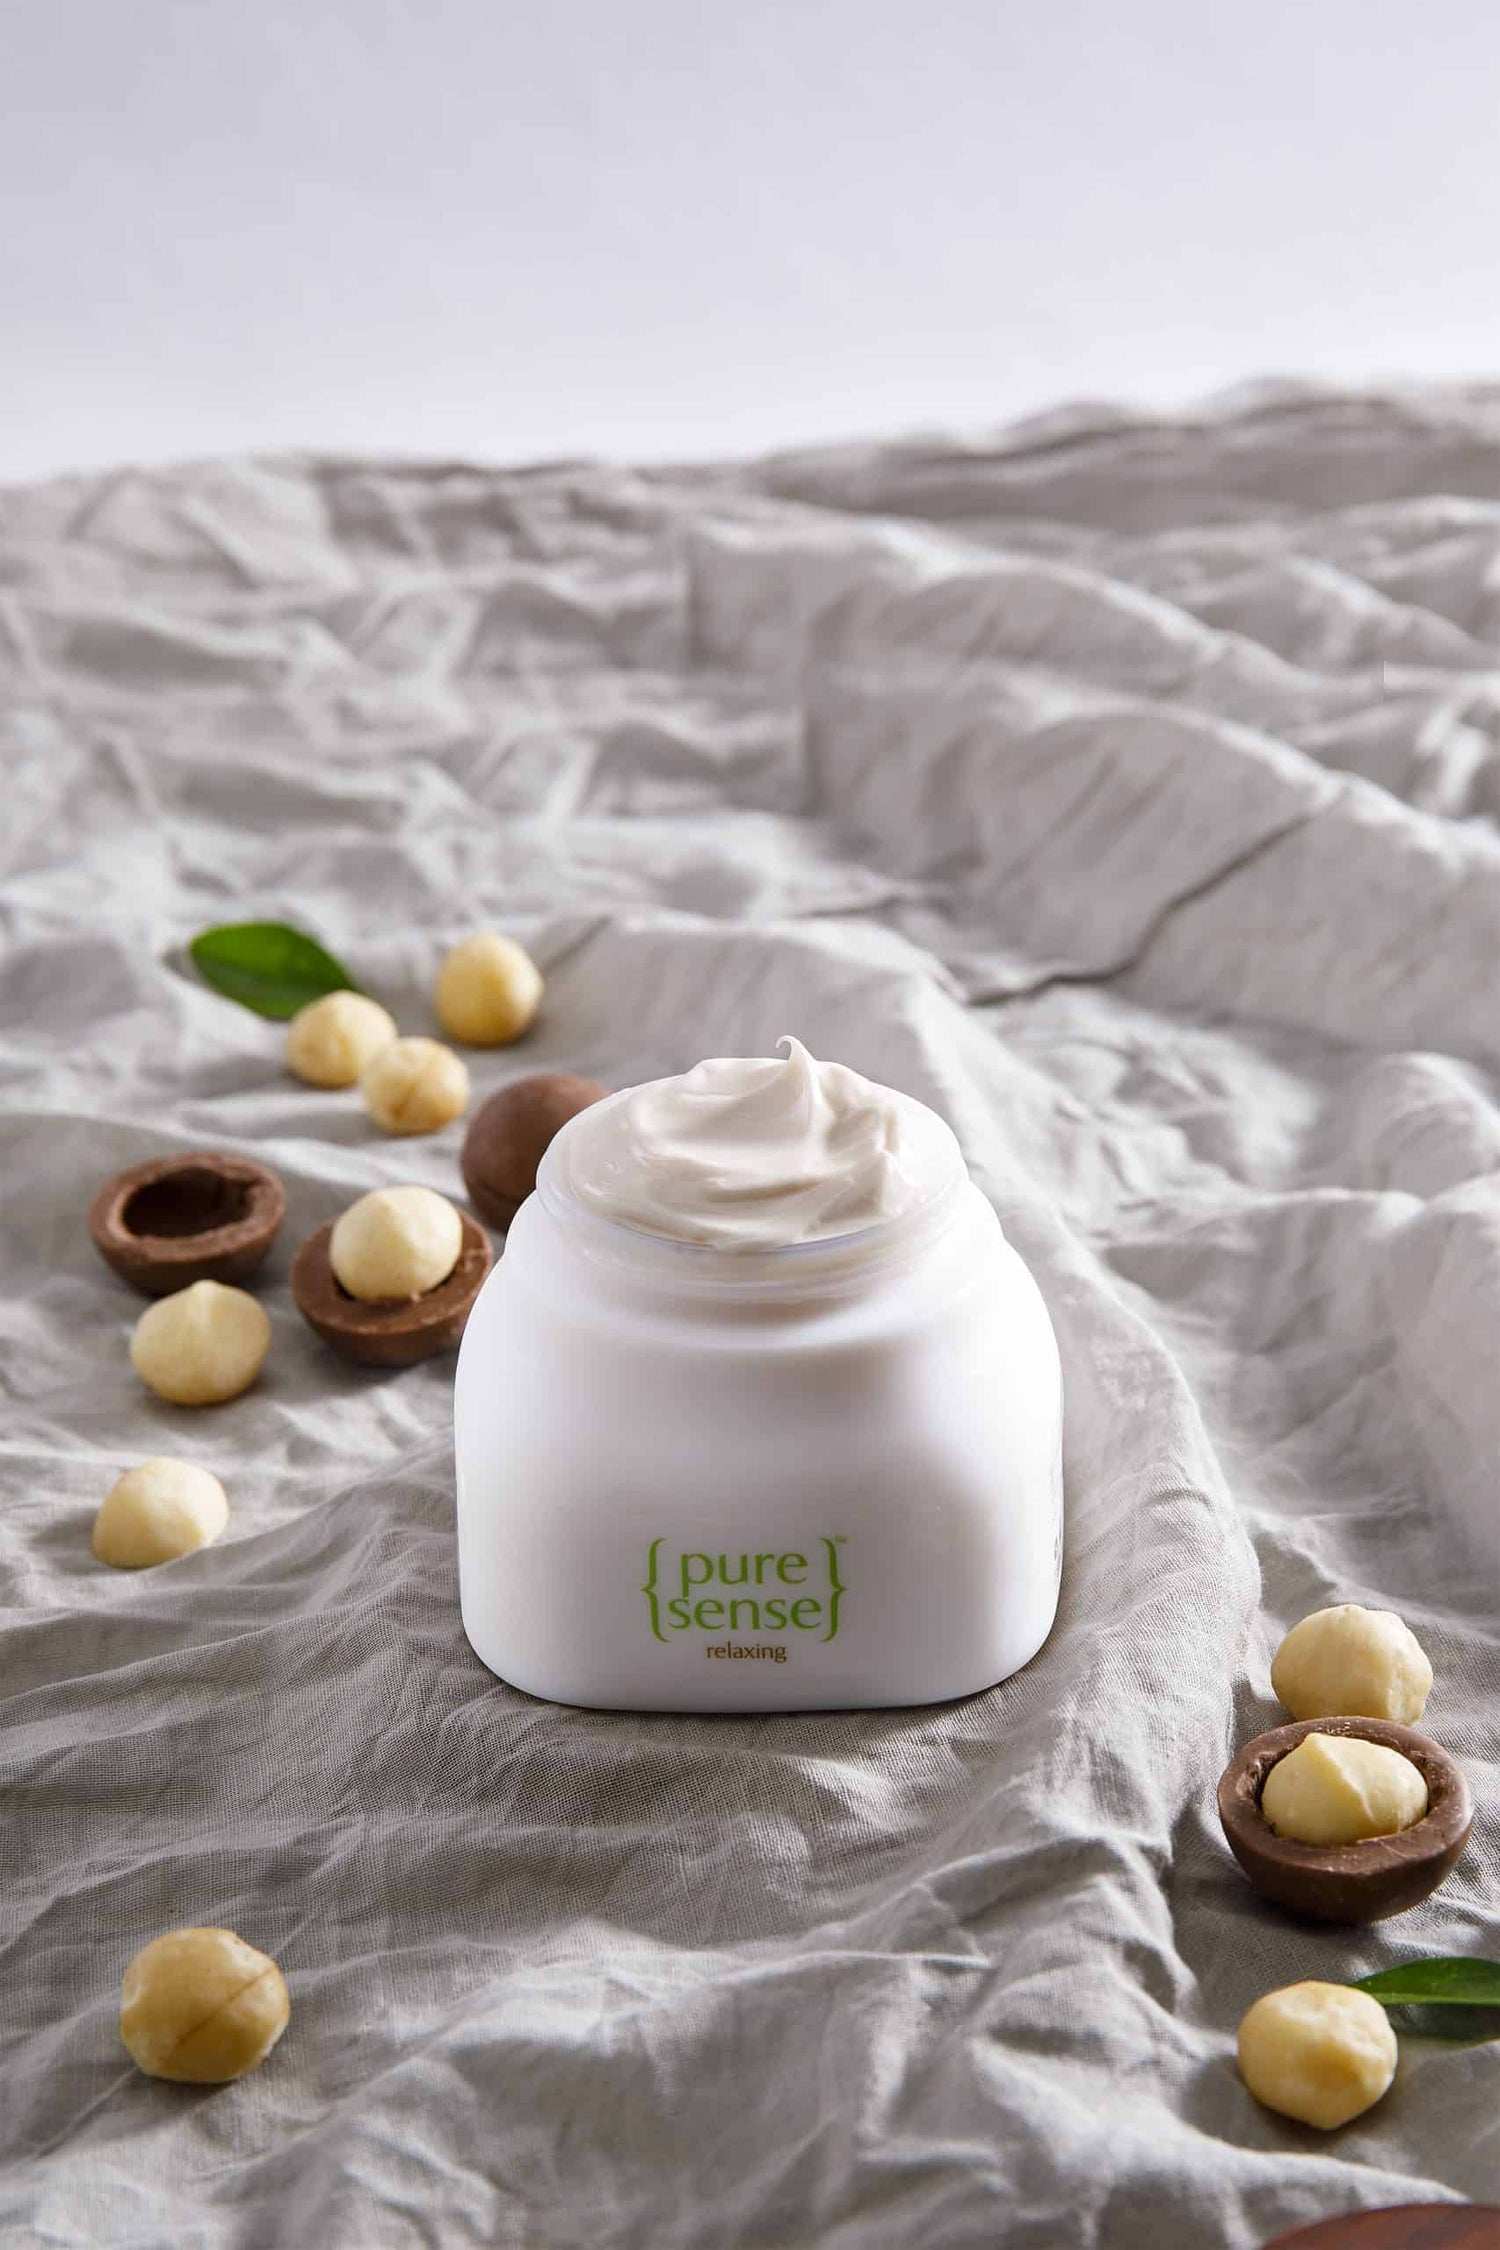 5 Reasons Why You Should Choose Pure Sense's Body Butter this Winter